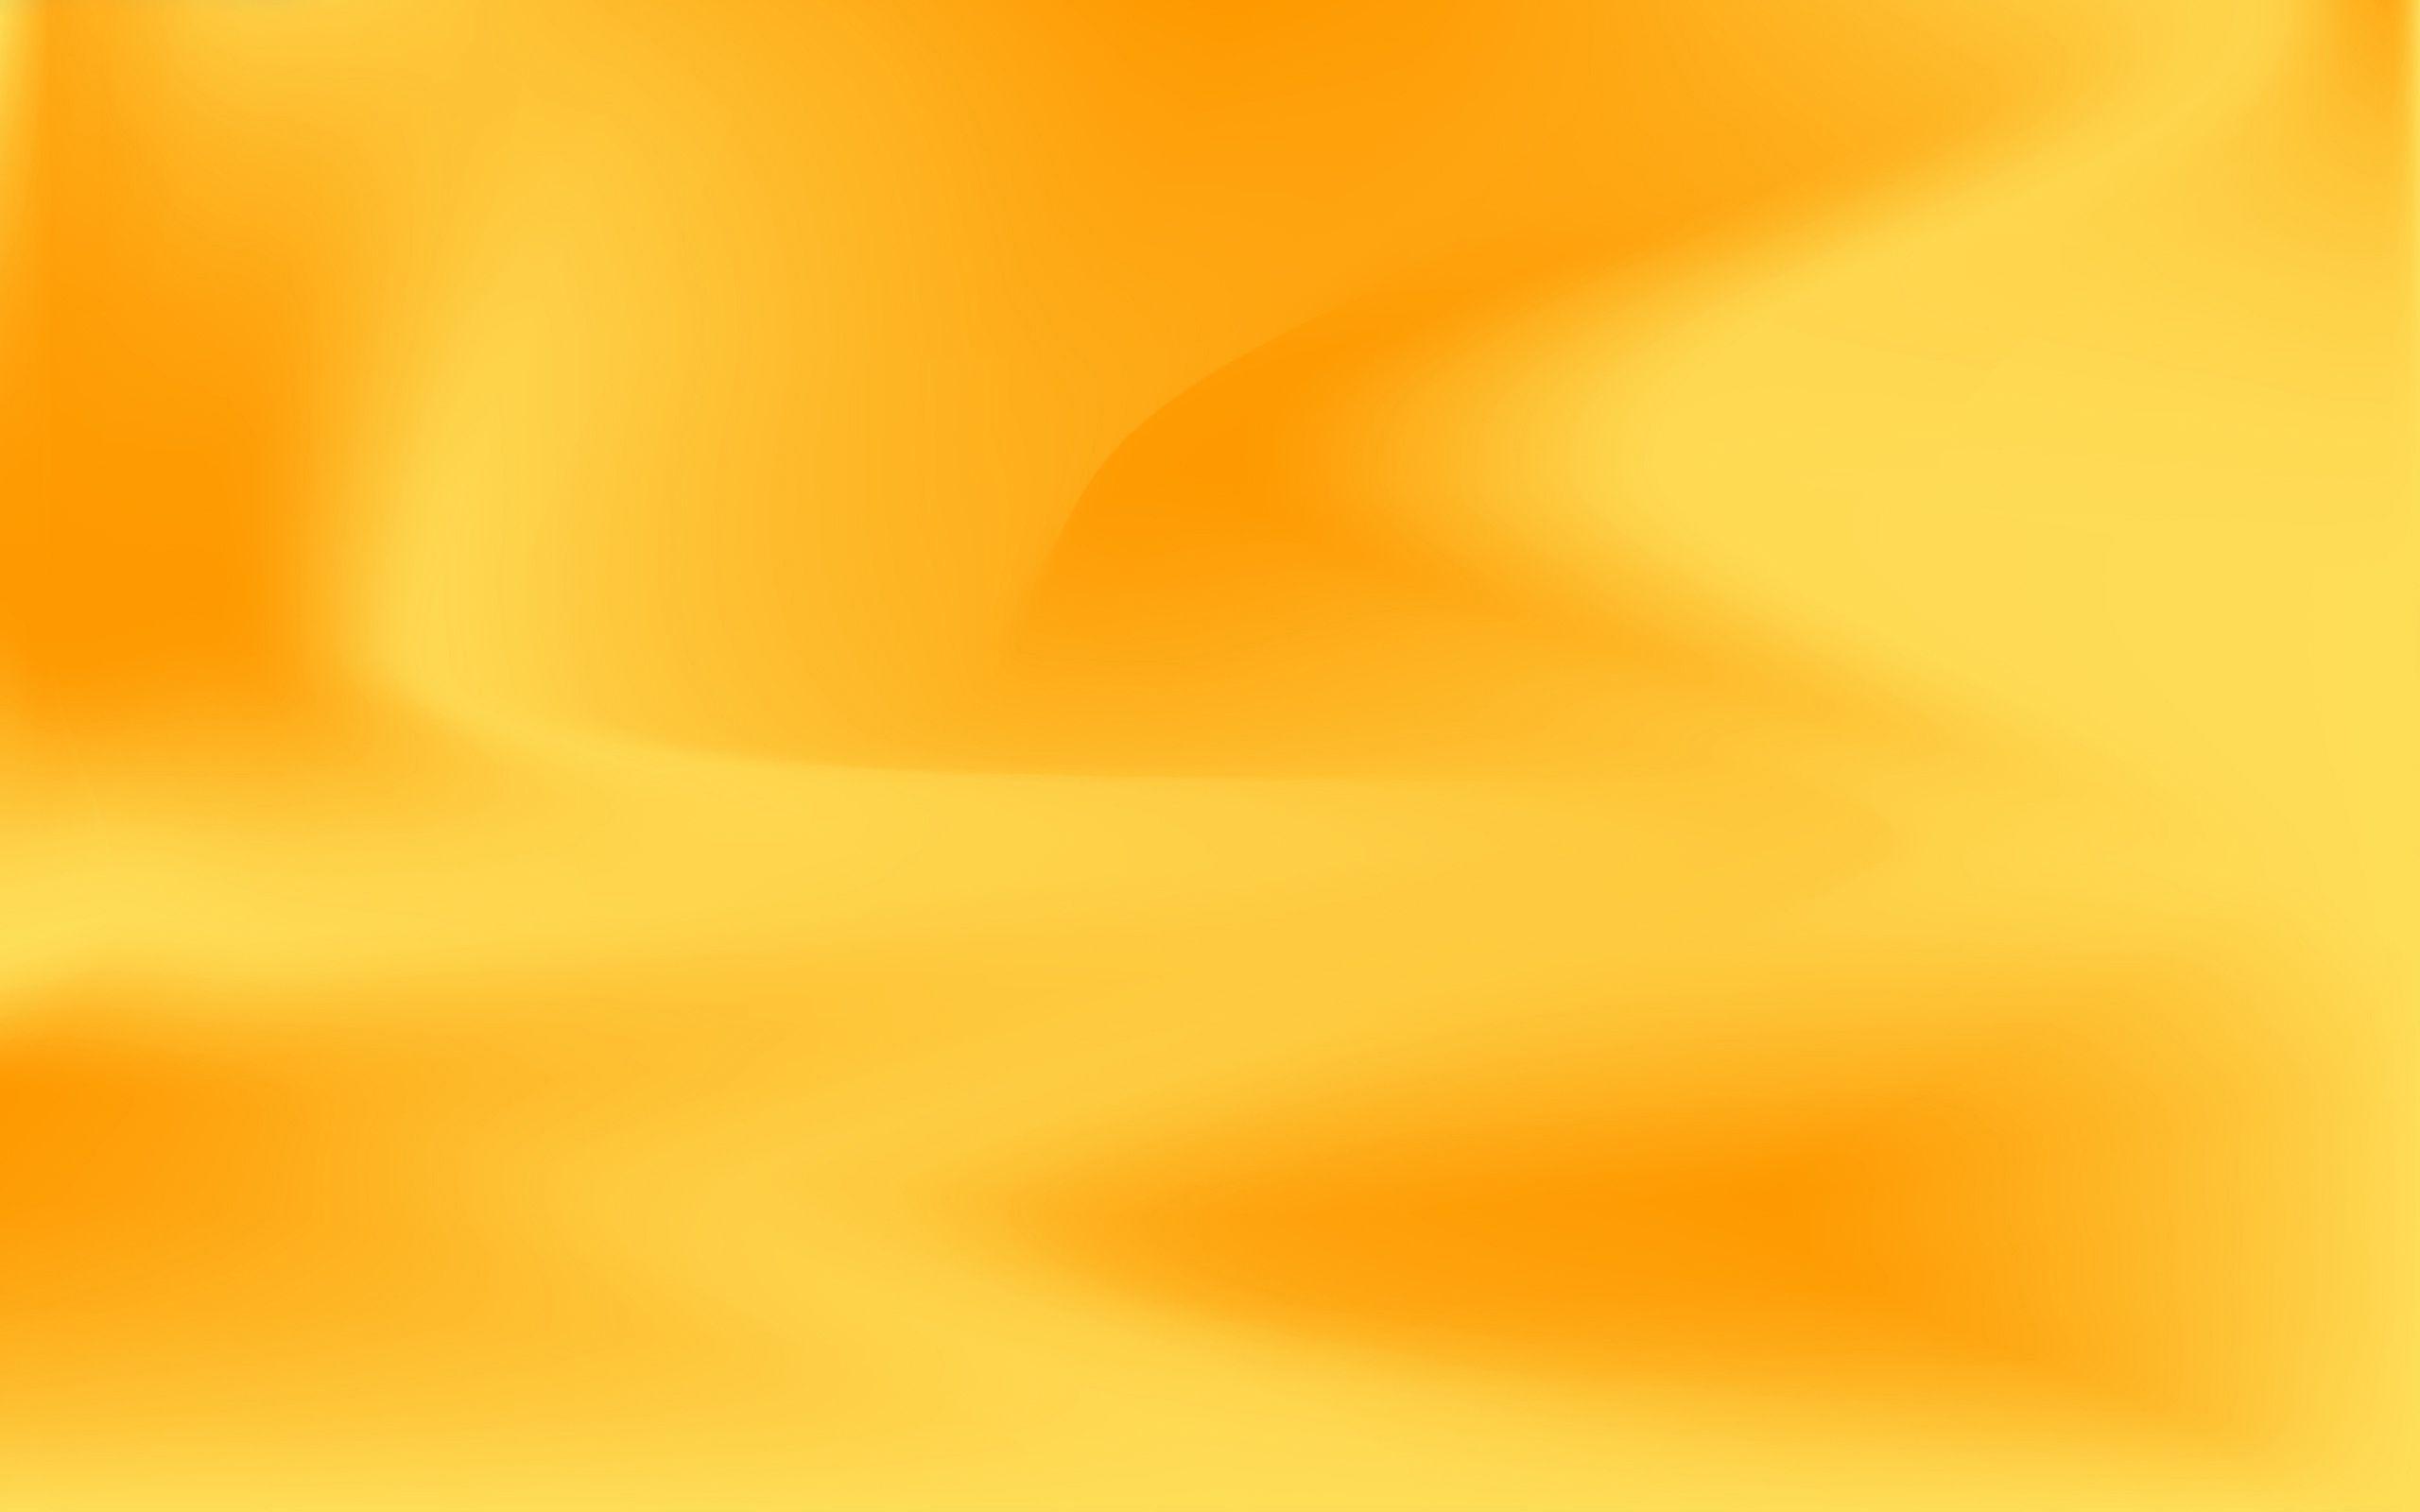 04.25.15 Orange Background, Abstract Image Galleries